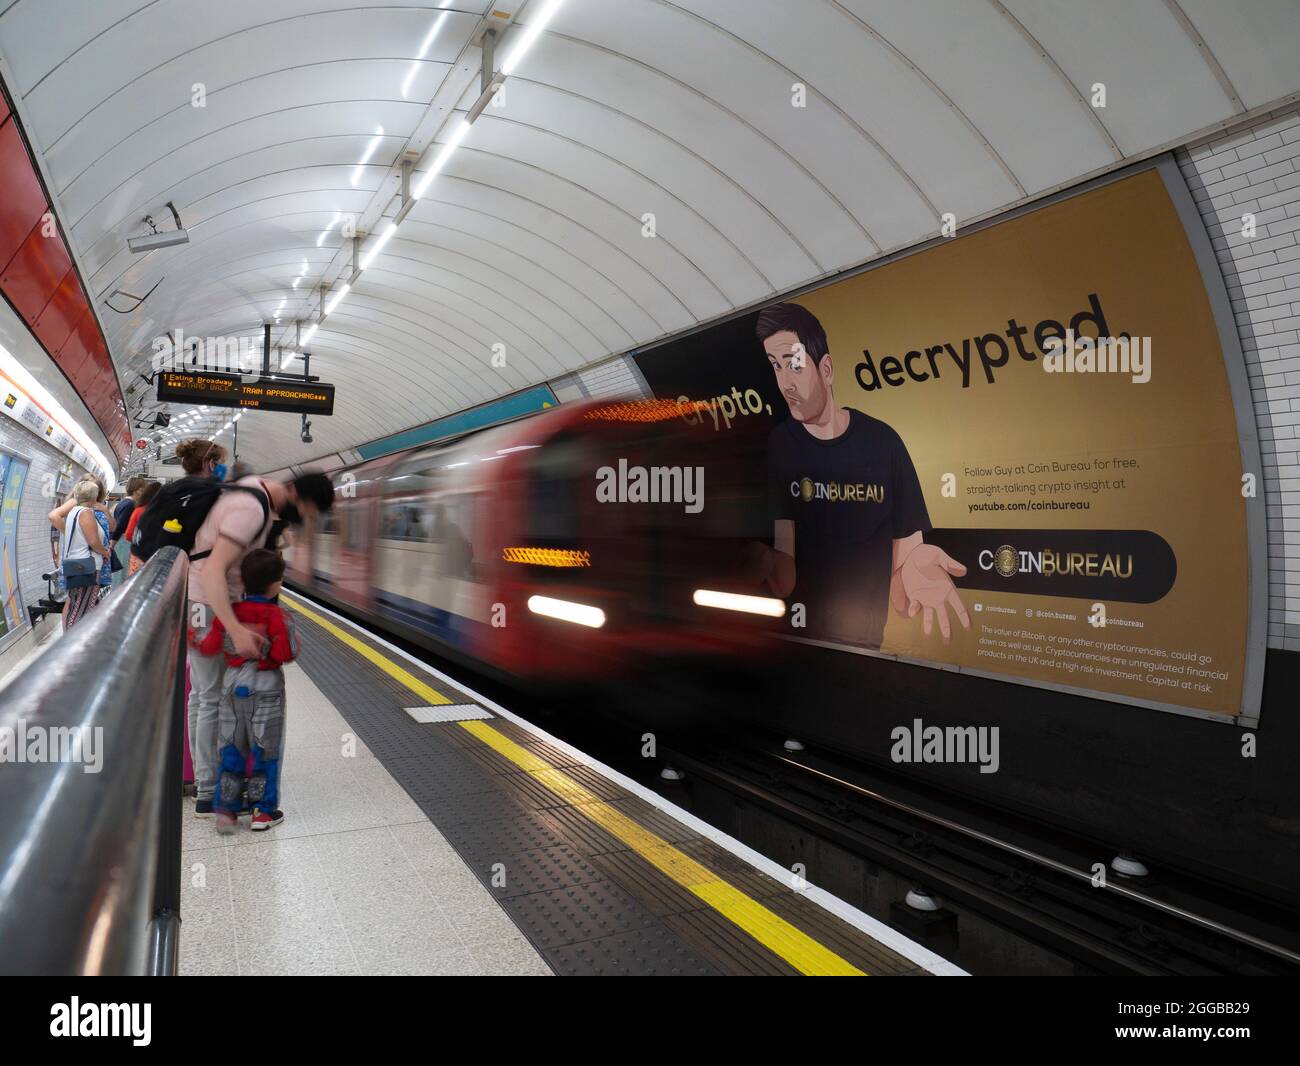 Crypto currency advertising on TFL London tube station for Coinbureau a popular cryptocurrency influencer Stock Photo